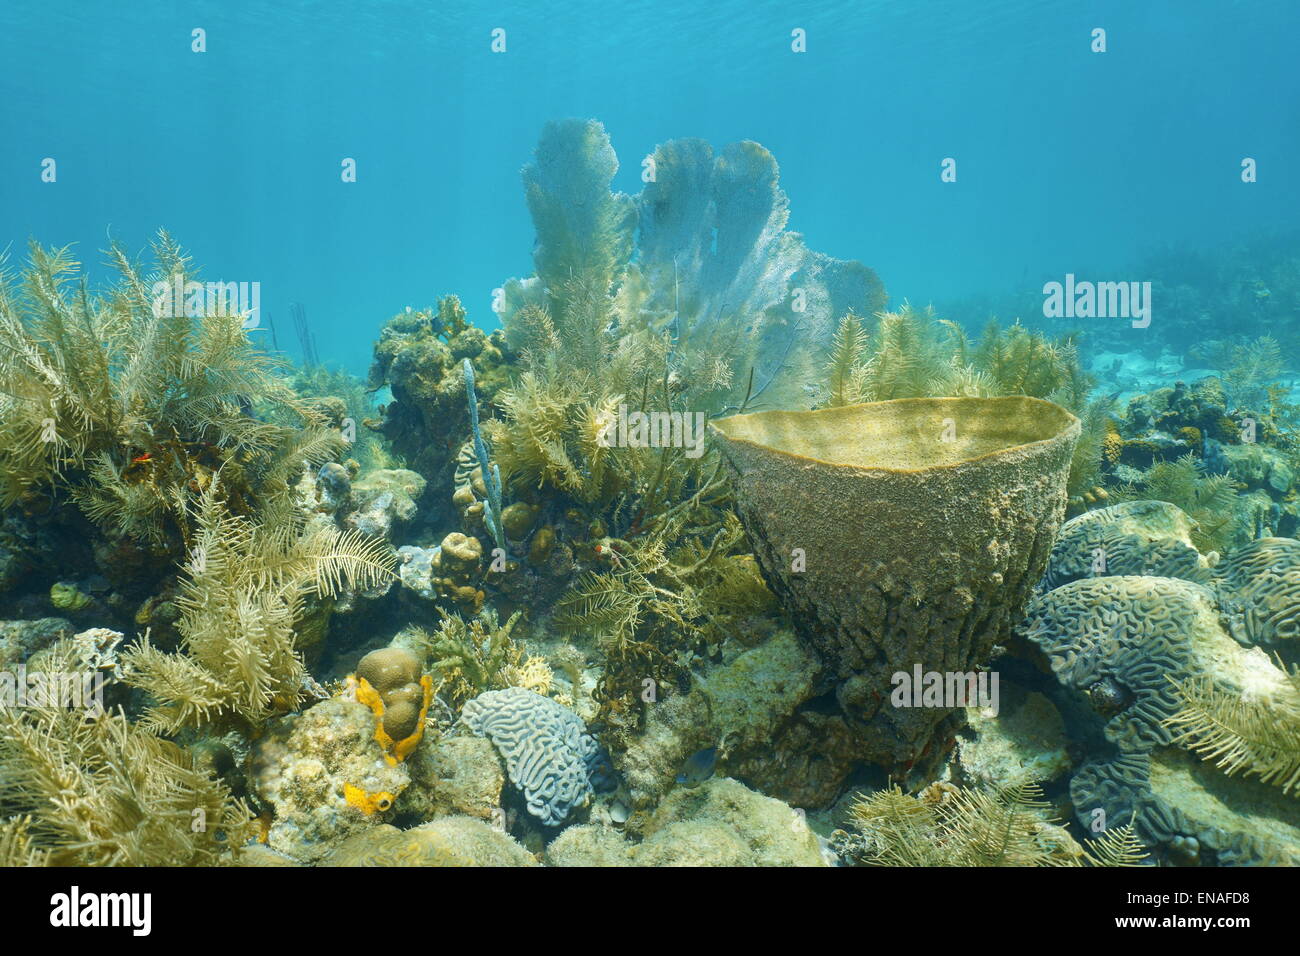 Coral reef under the water with vase sponge, Caribbean sea Stock Photo